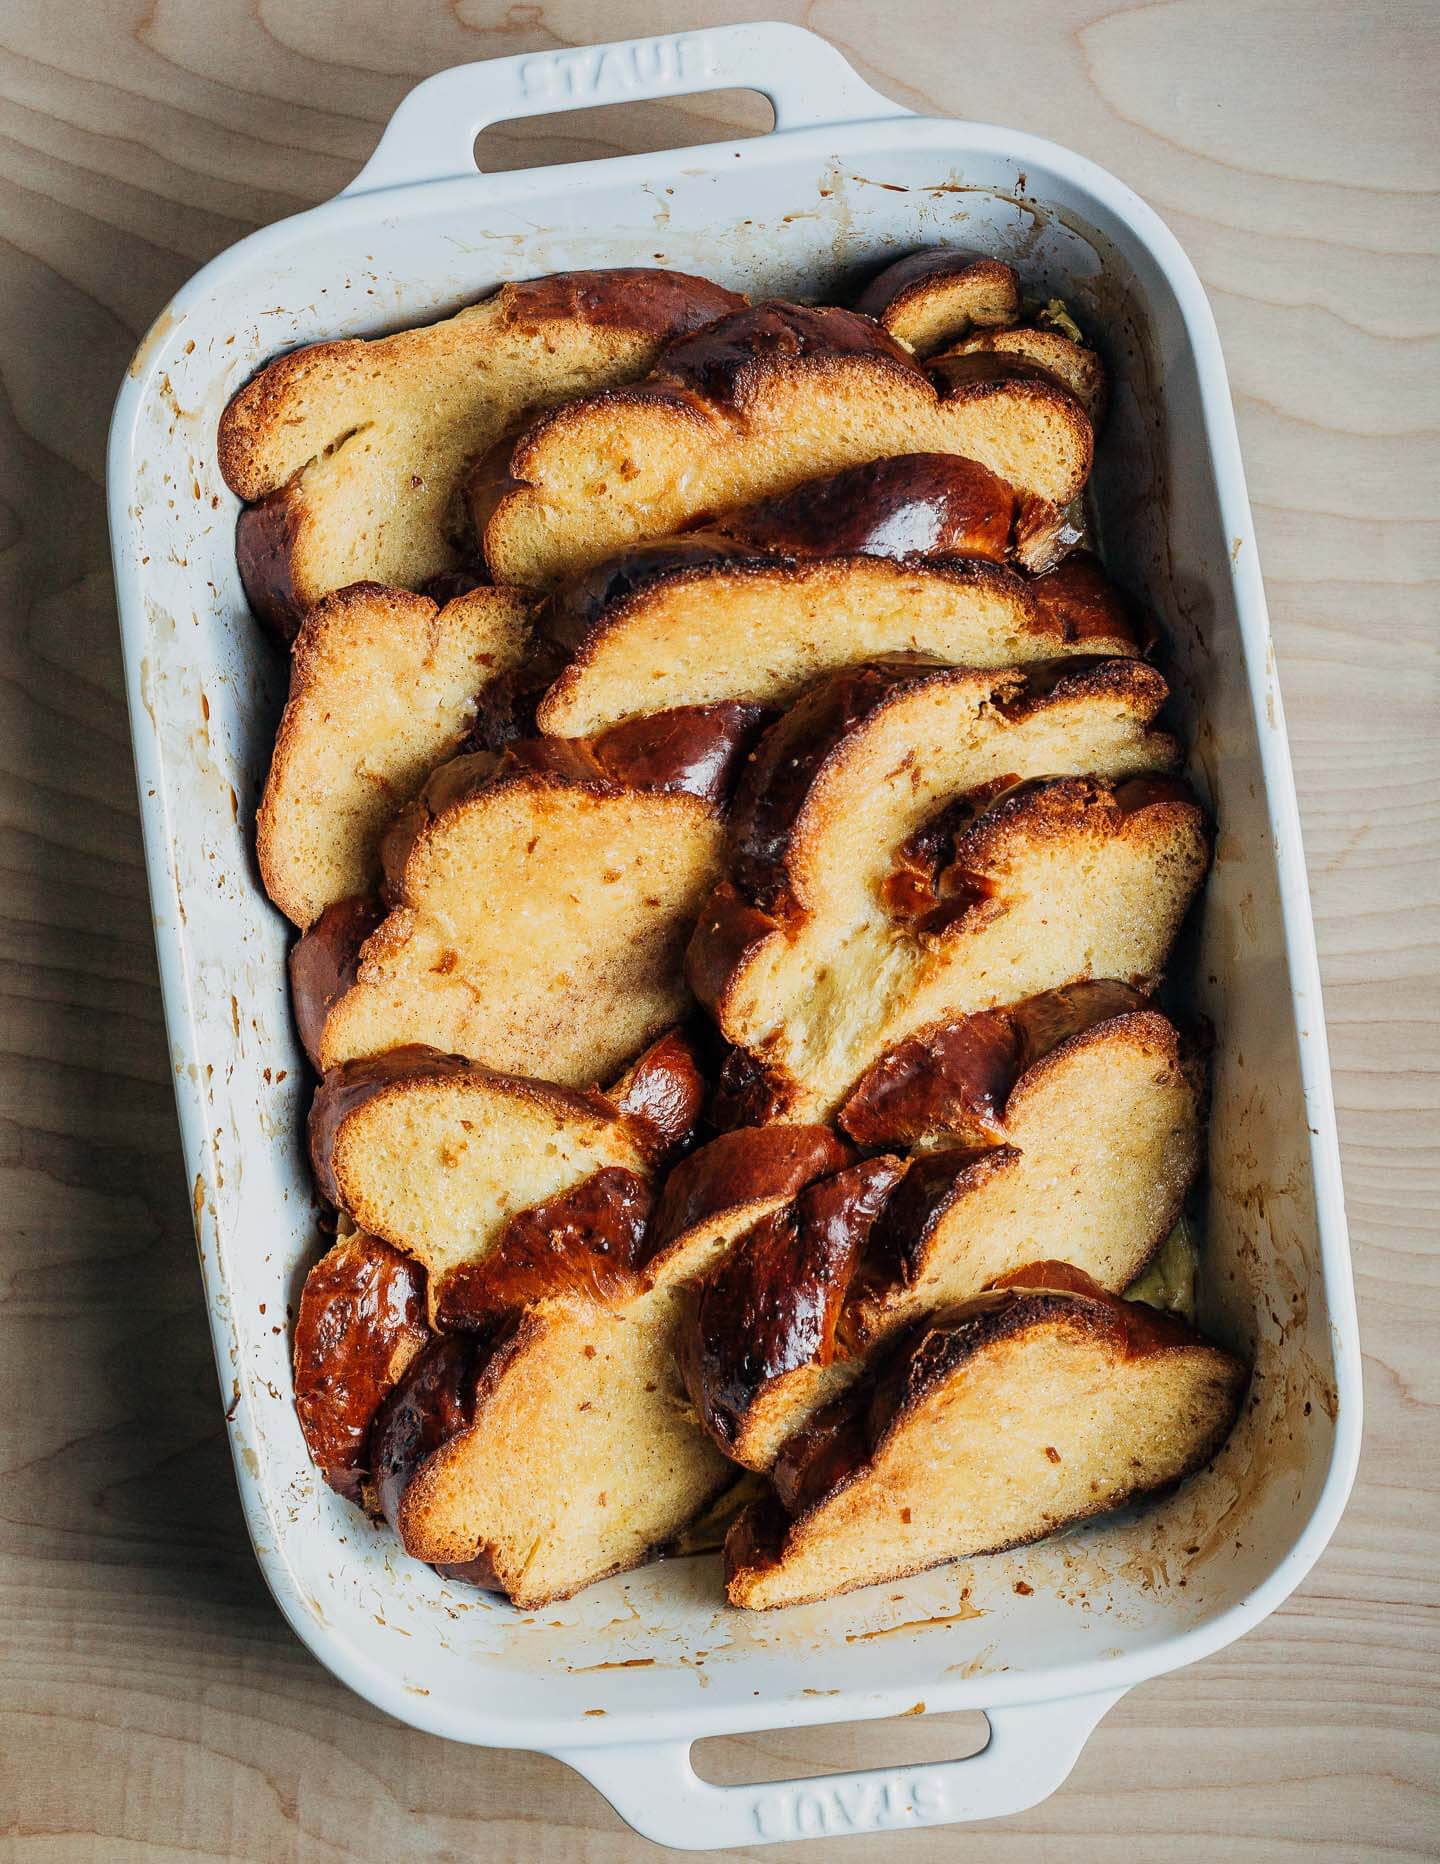 Baked French toast in a balking dish, just out of the oven